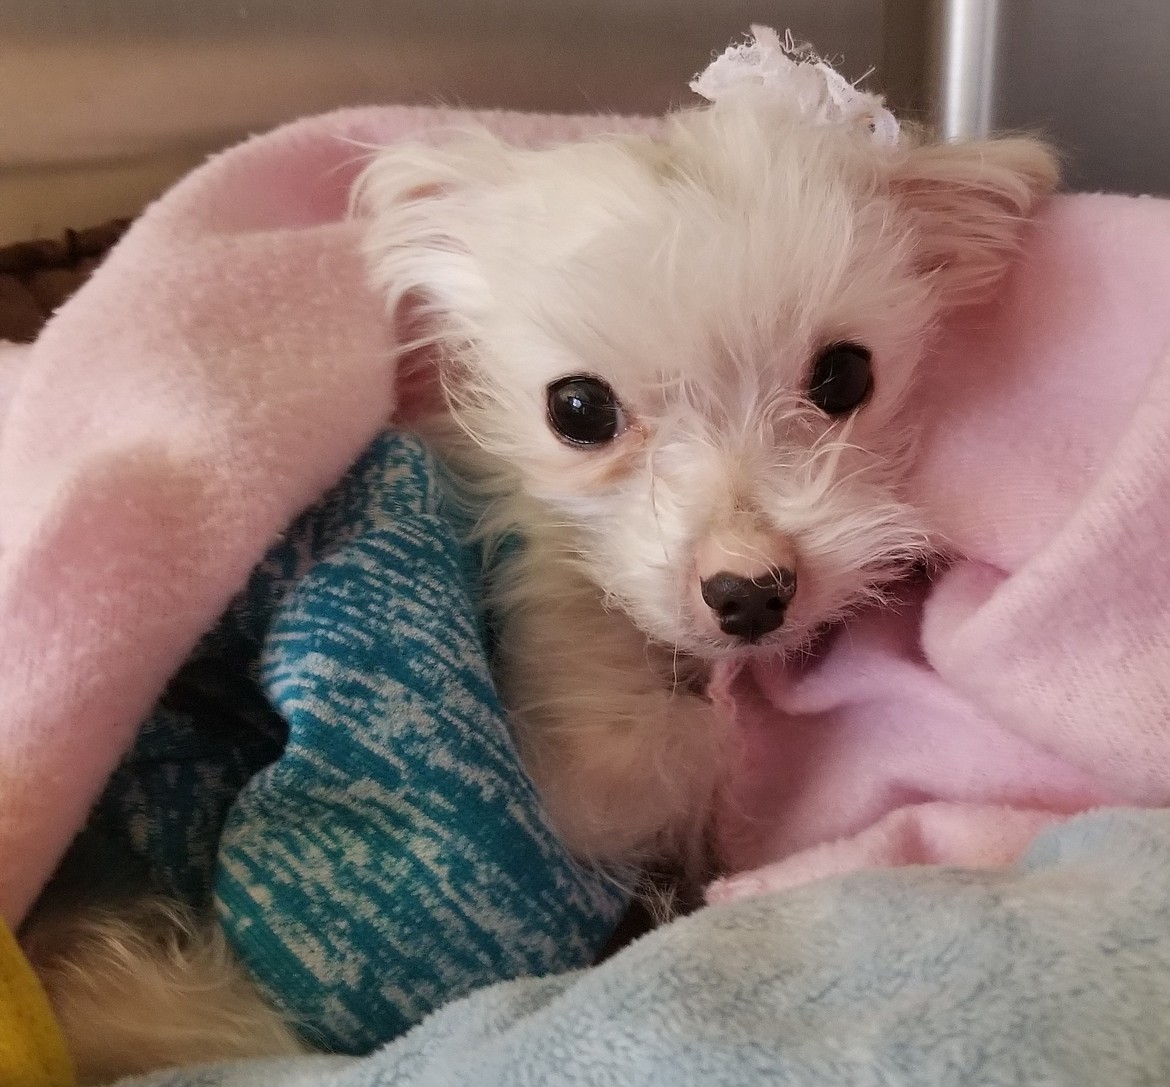 Kootenai Humane Society nursed this small dog back to health after he was found in a gutter, barely alive. (Photo courtesy of Kootenai Humane Society)